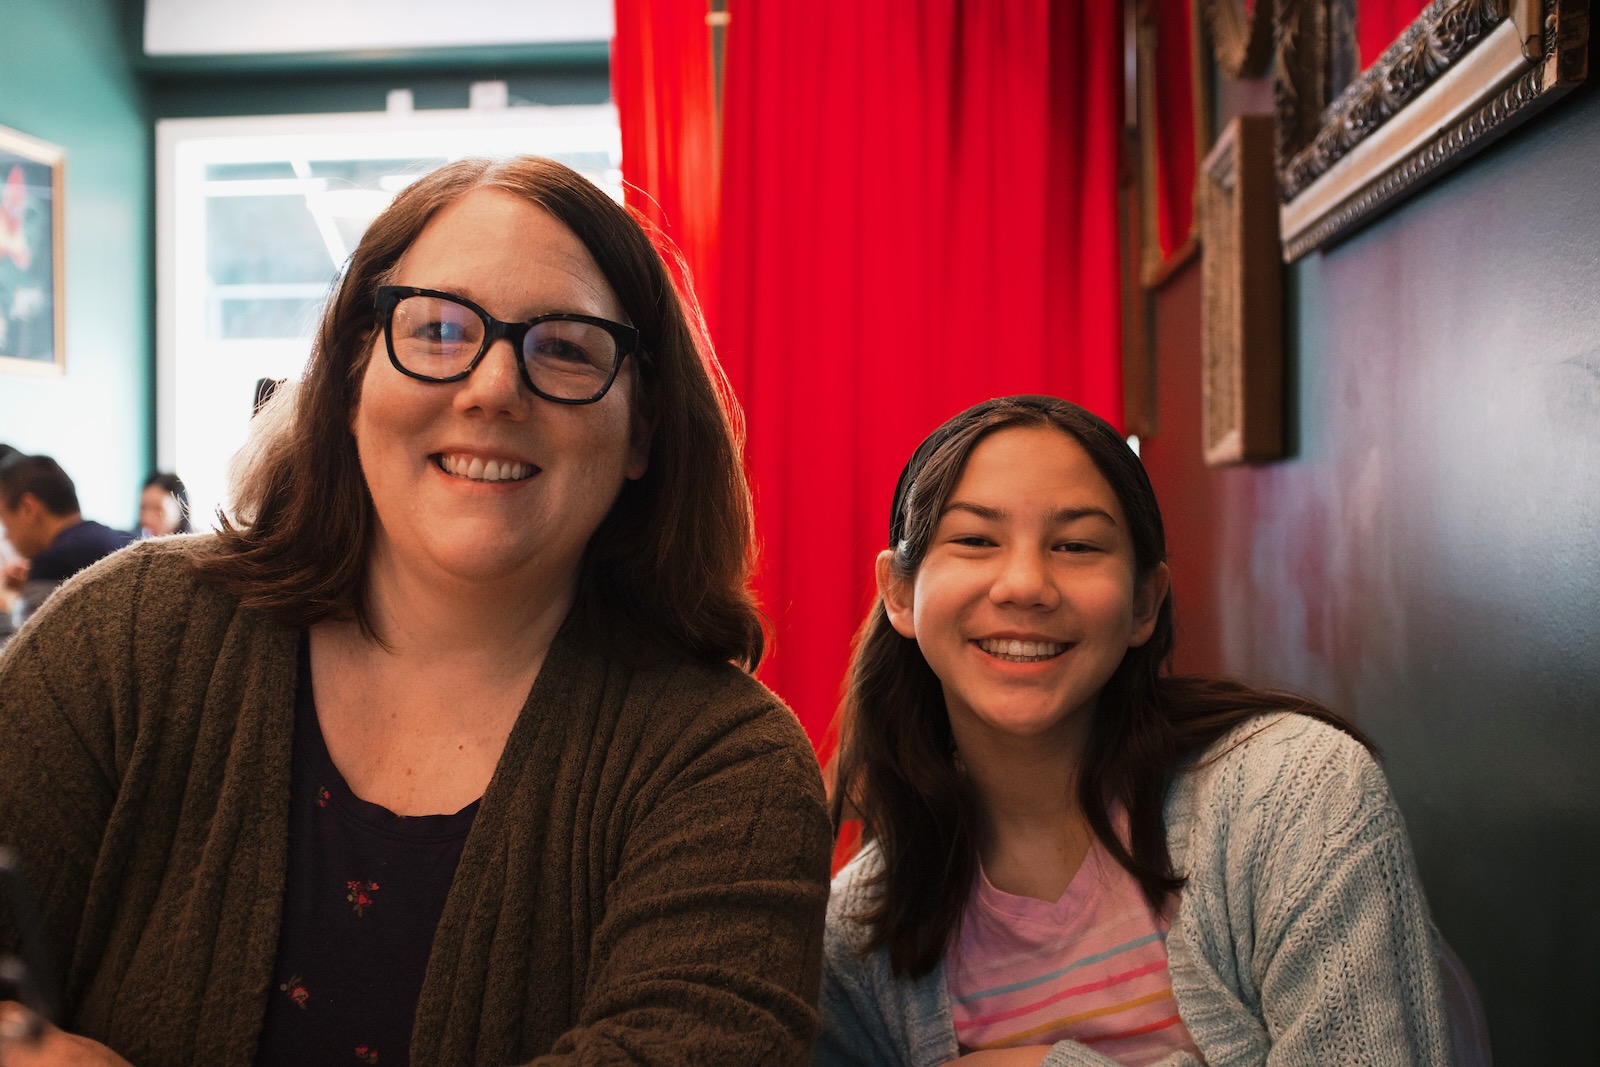 A woman and a young girl sitting side by side in a restaurant, smiling. The woman wears glasses and wears a green cardigan. The girl has a headband and a pink shirt with a grey cardigan over it. Behind them in the near distance is a bright red curtain leading to the entrance of the restaurant.